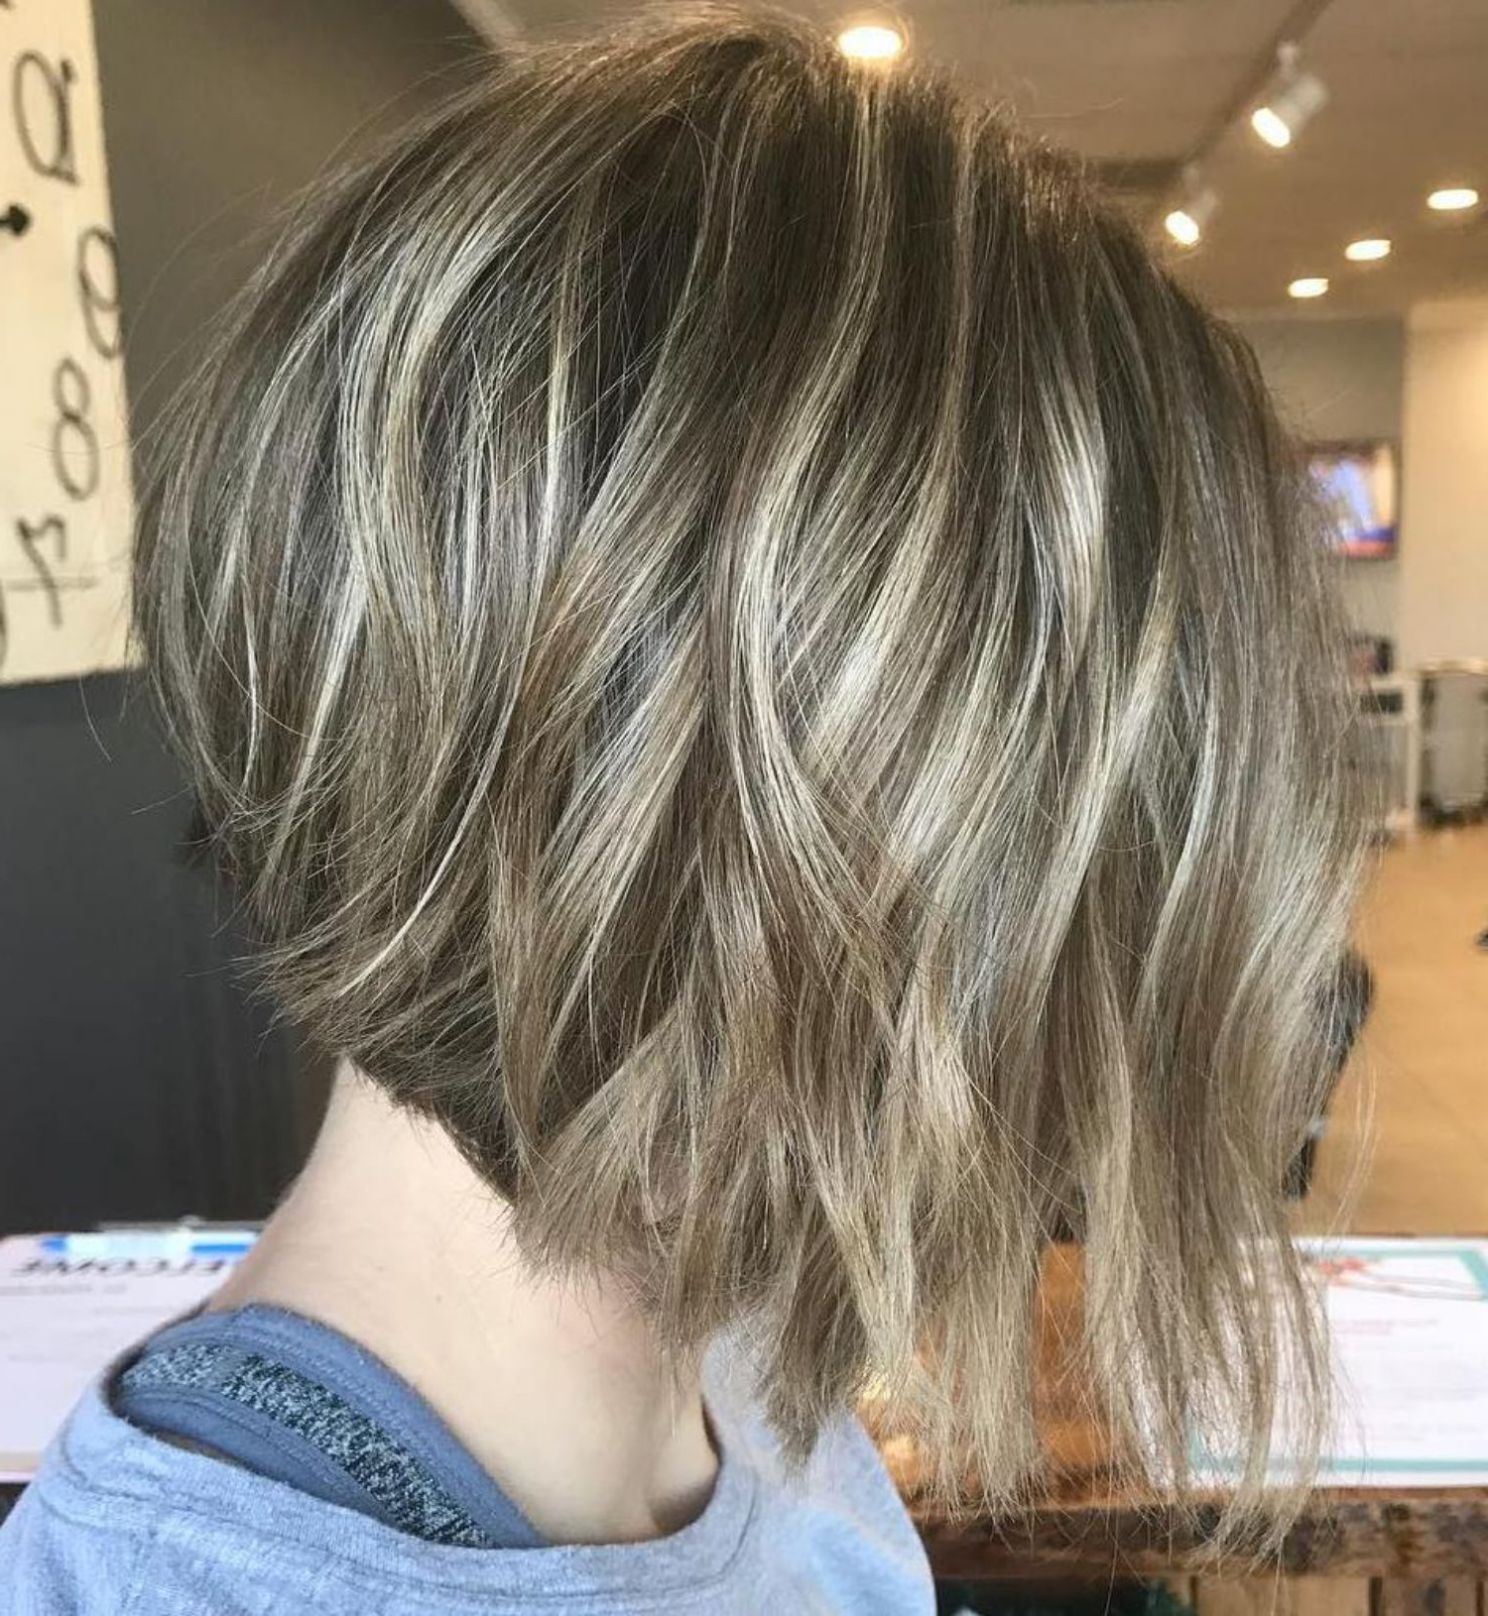 Well Known Layered Tousled Bob Hairstyles Inside 60 Layered Bob Styles: Modern Haircuts With Layers For Any Occasion (Gallery 20 of 20)